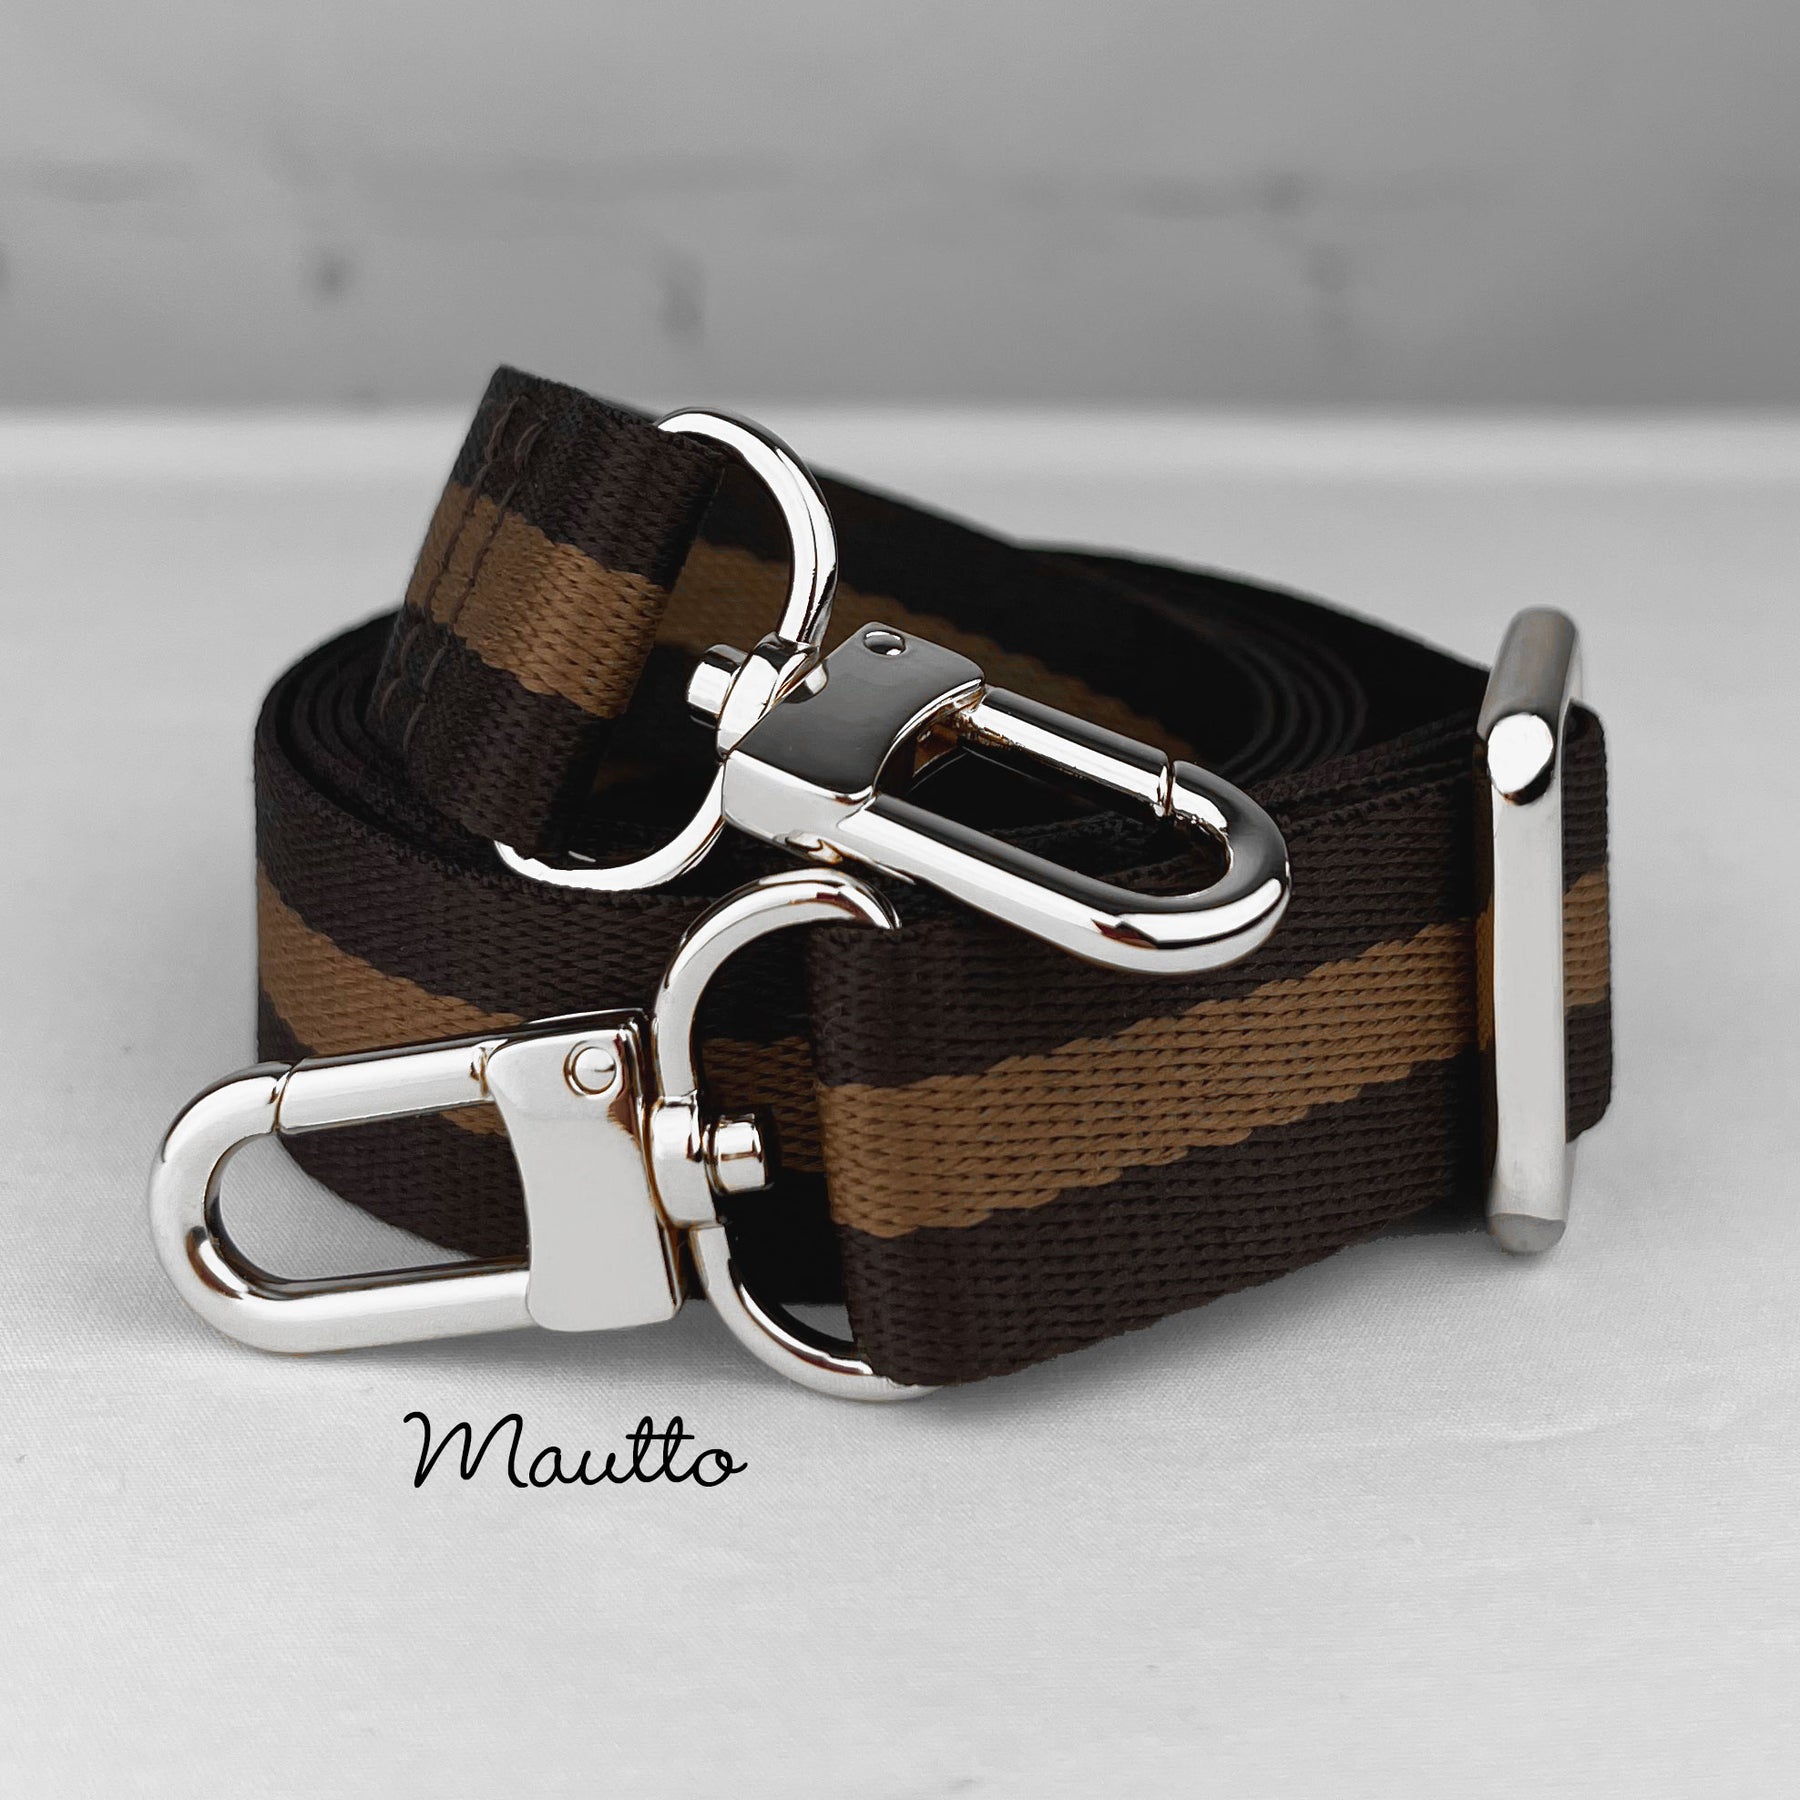 Crossbody Strap - Black and Silver Gold Hardware